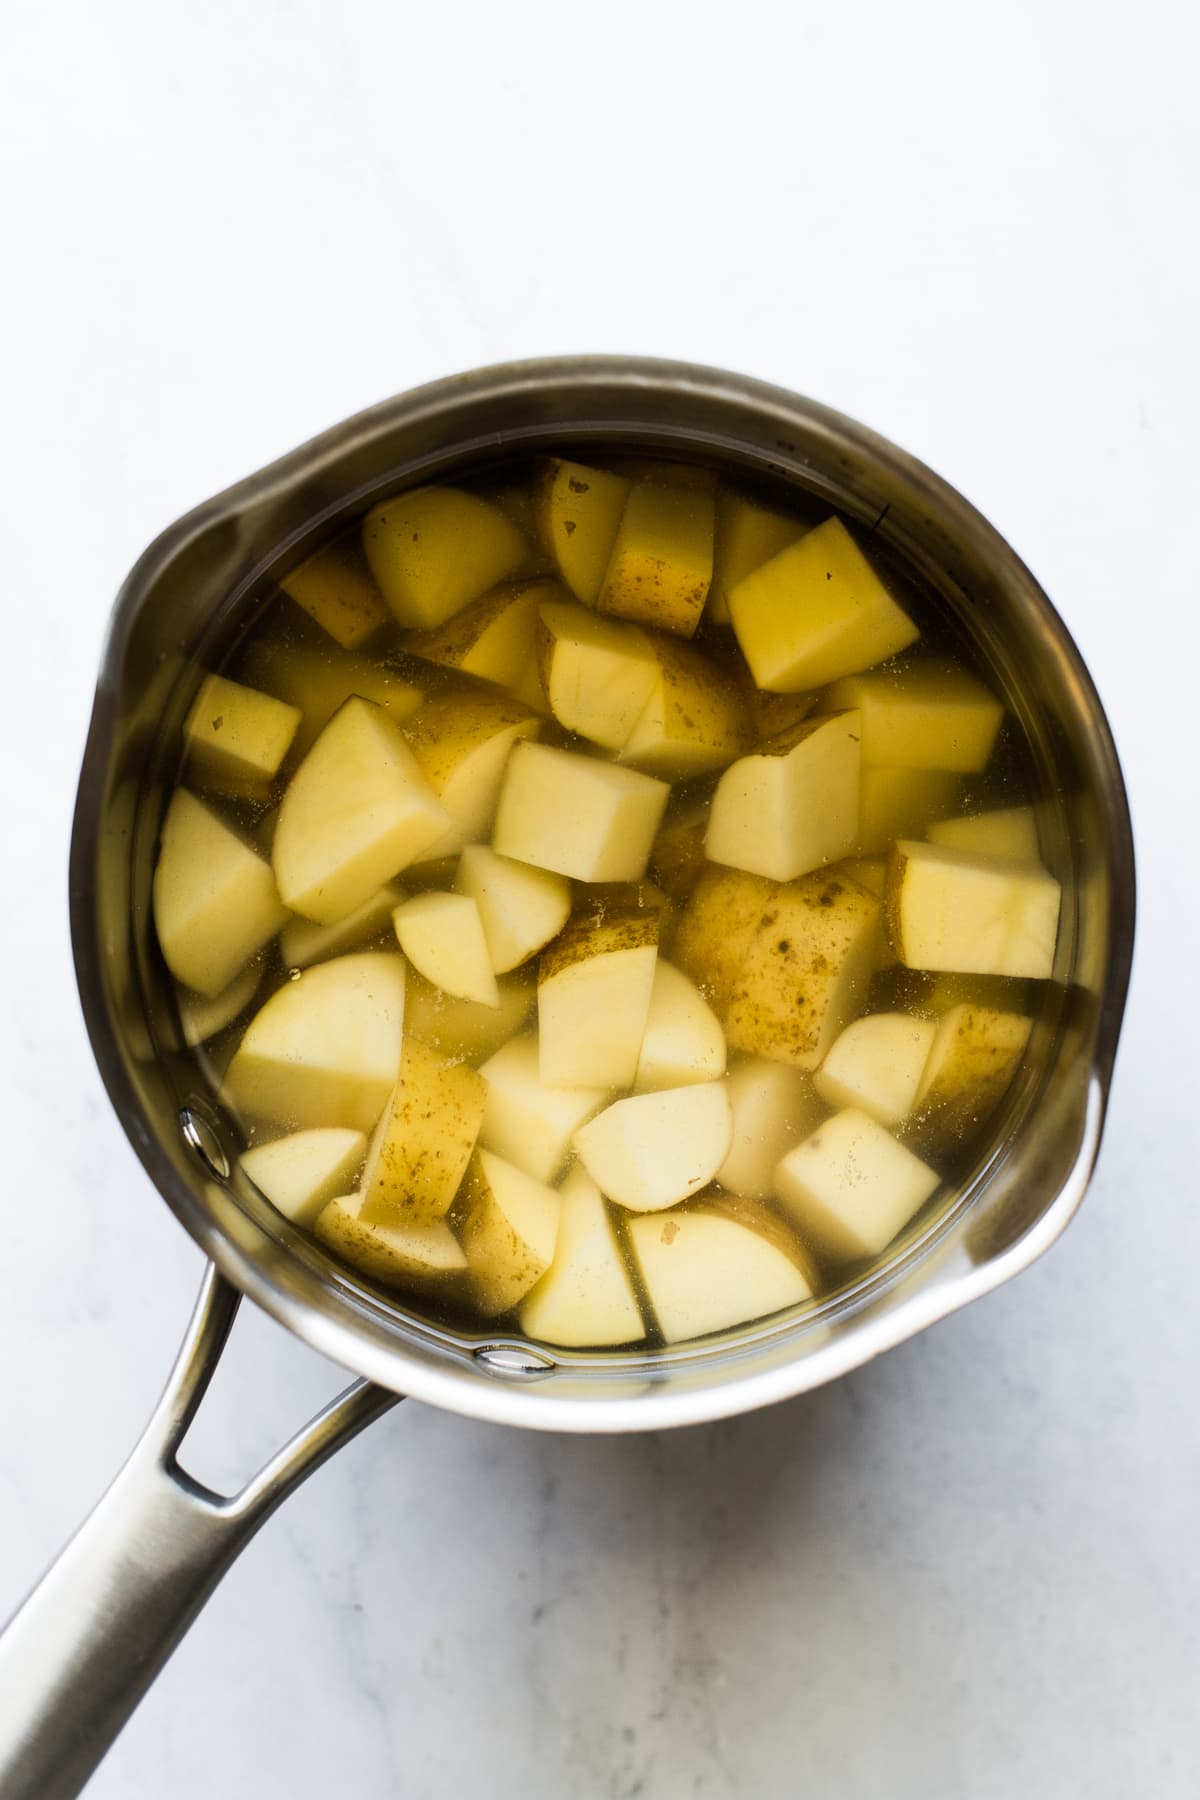 Potatoes cooking in a small saucepan.